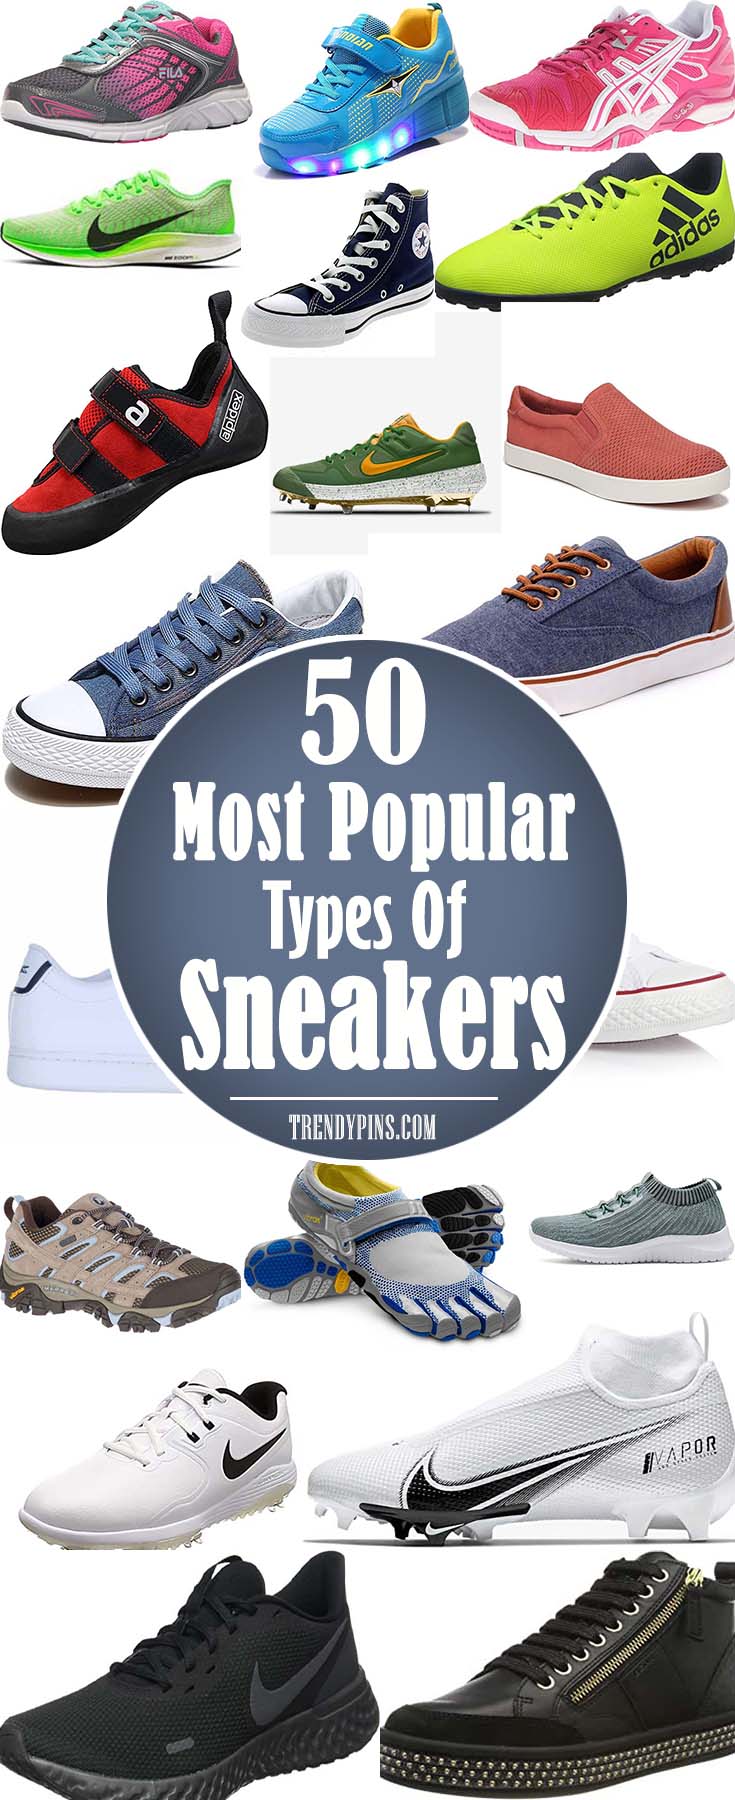 50 Most Popular Types Of Sneakers #sneakers #fashion #trendypins